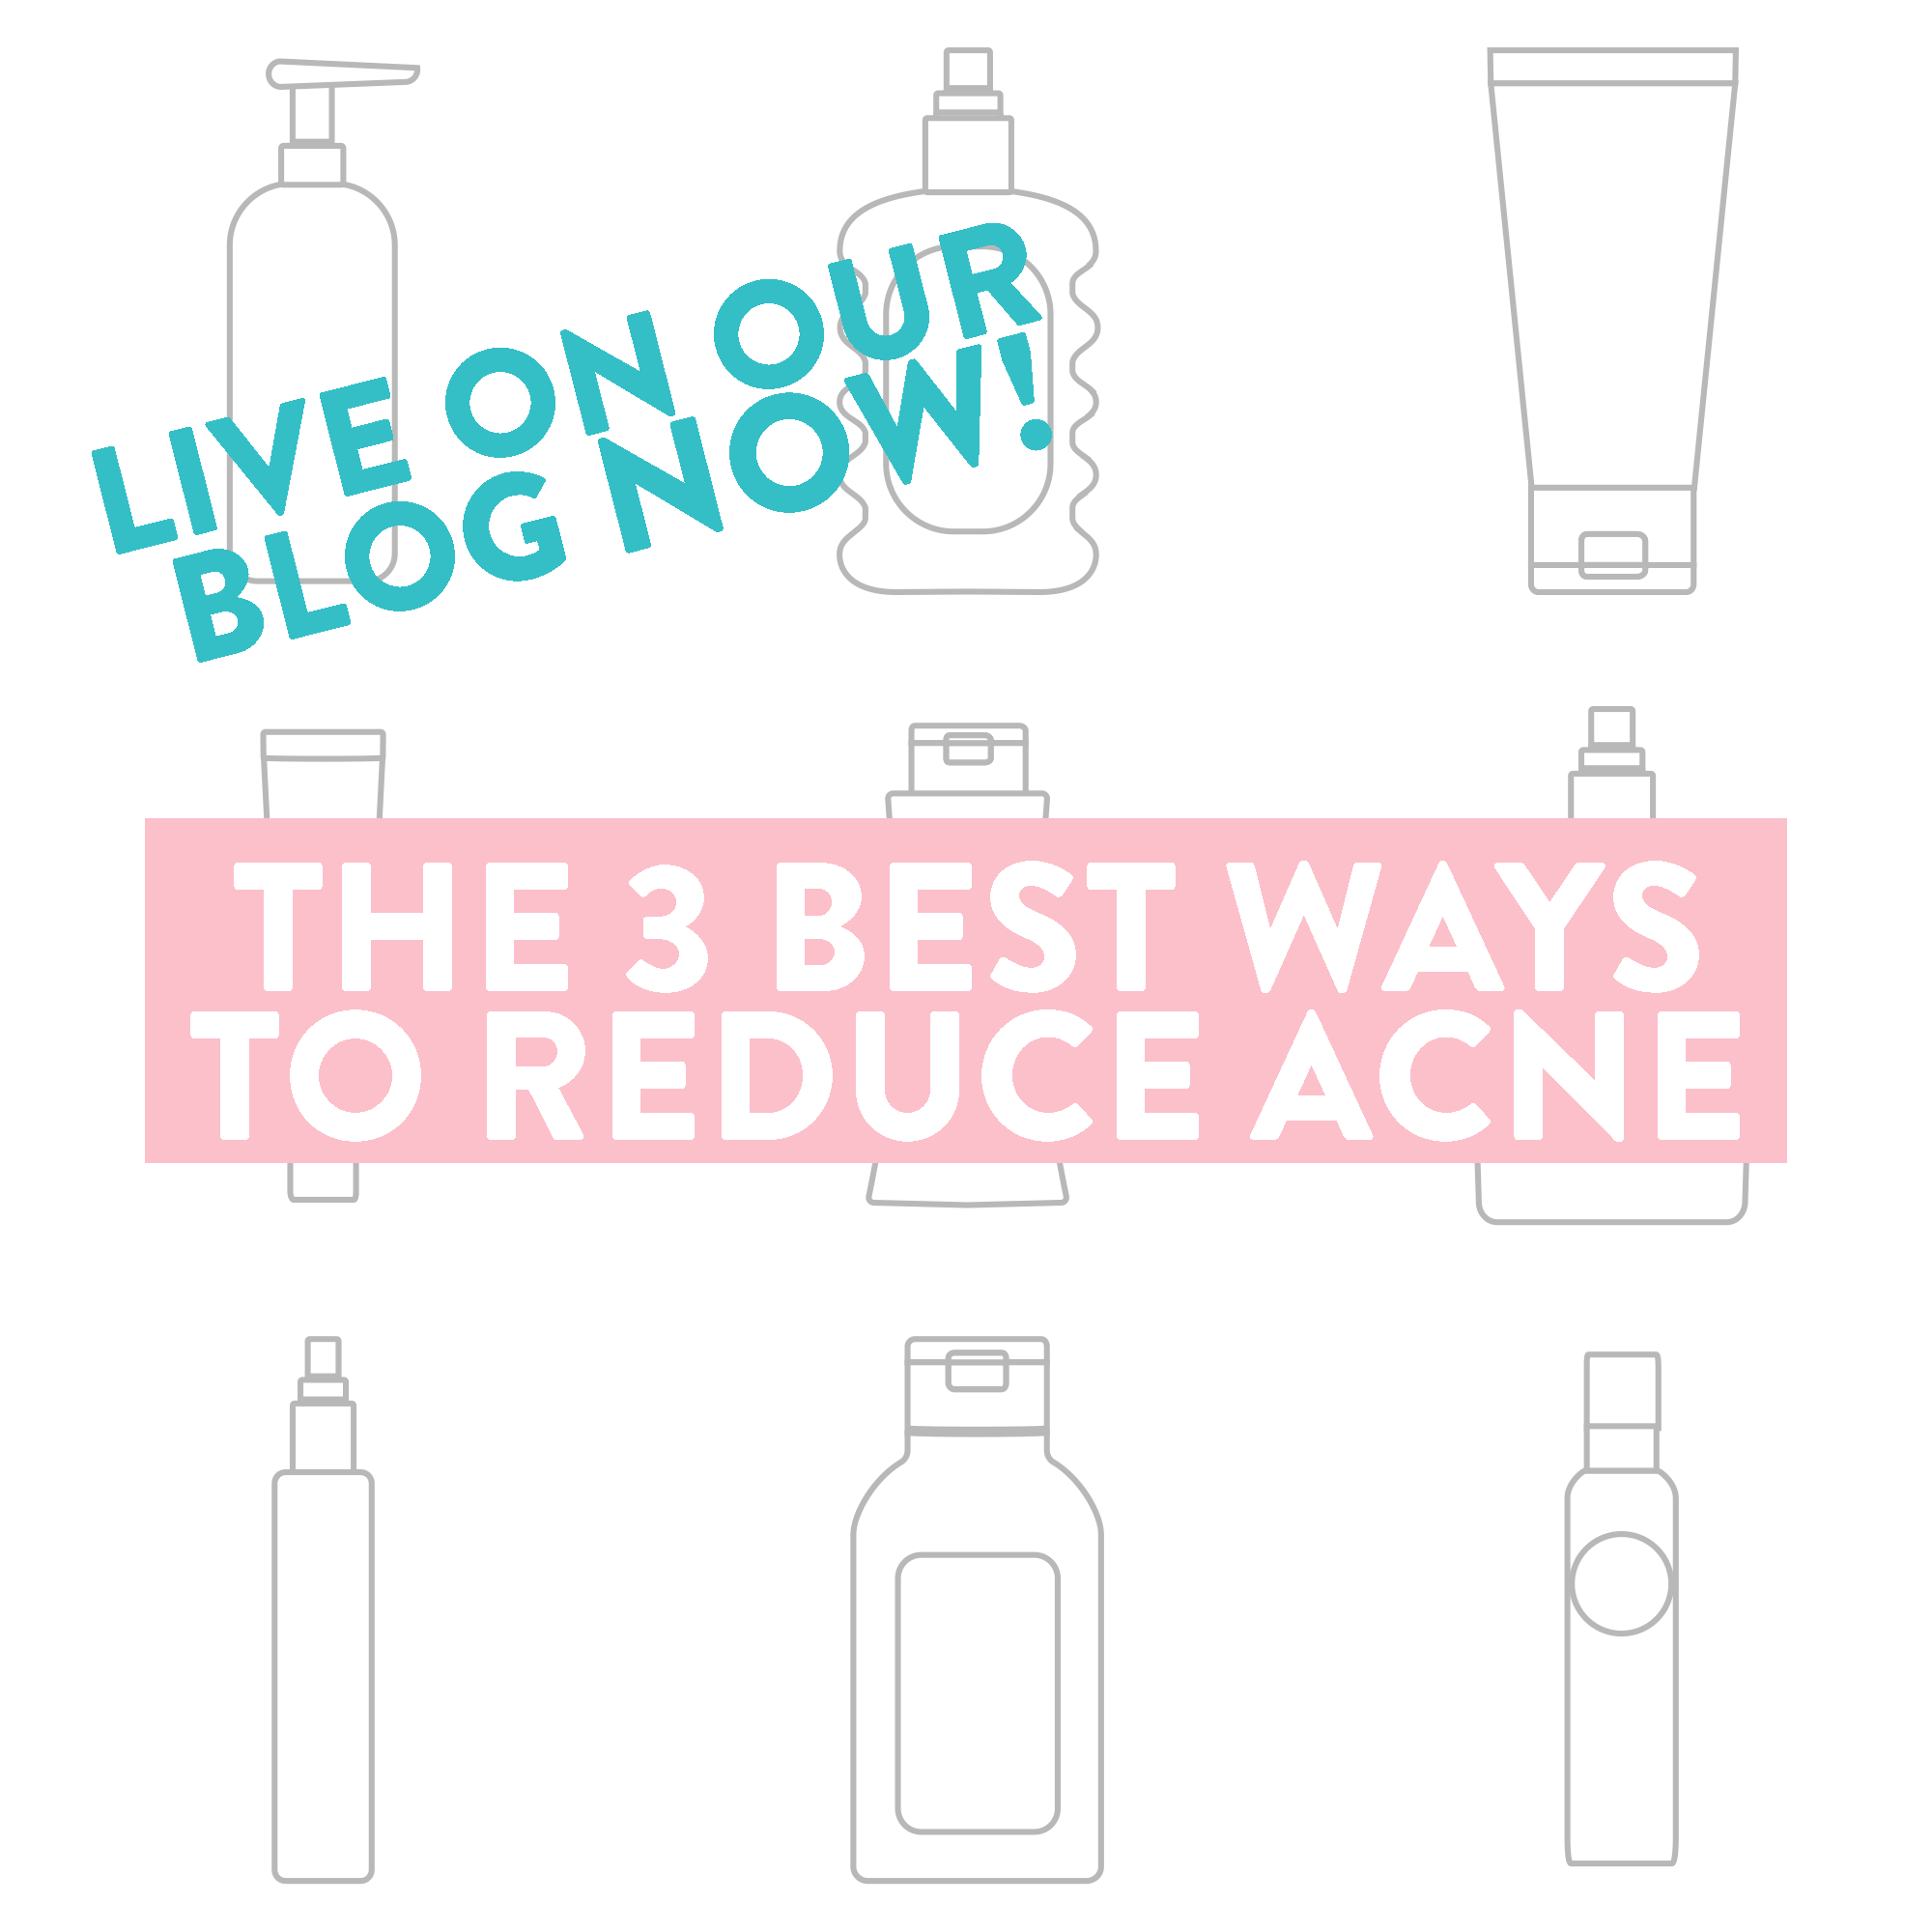 The 3 best ways to reduce acne 🧖🏼‍♀️✨